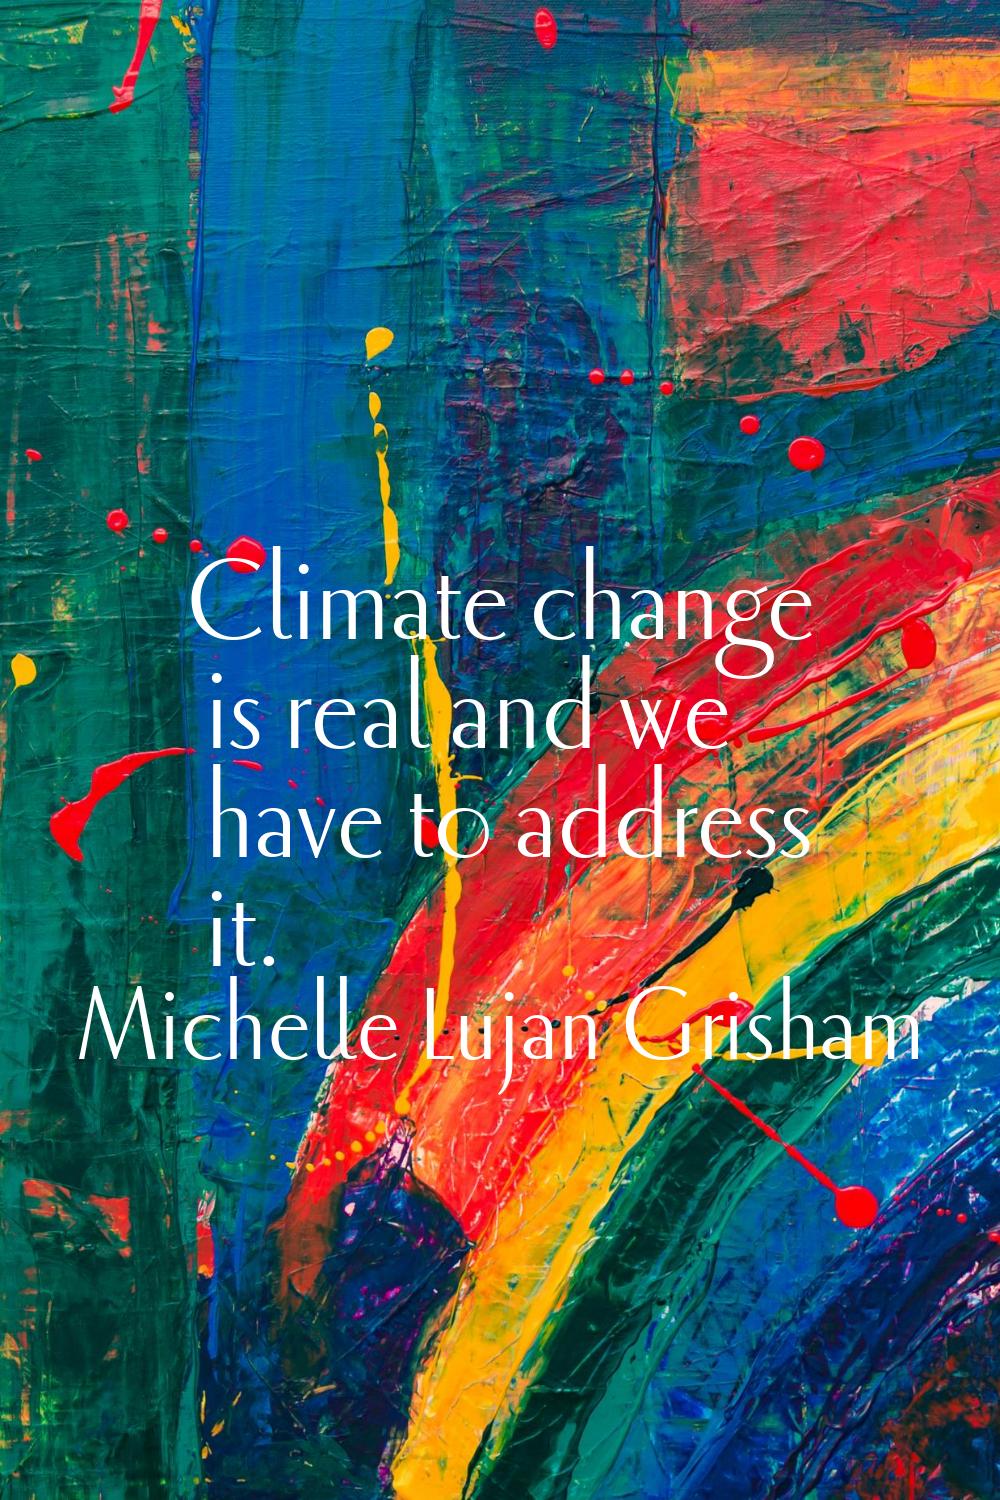 Climate change is real and we have to address it.